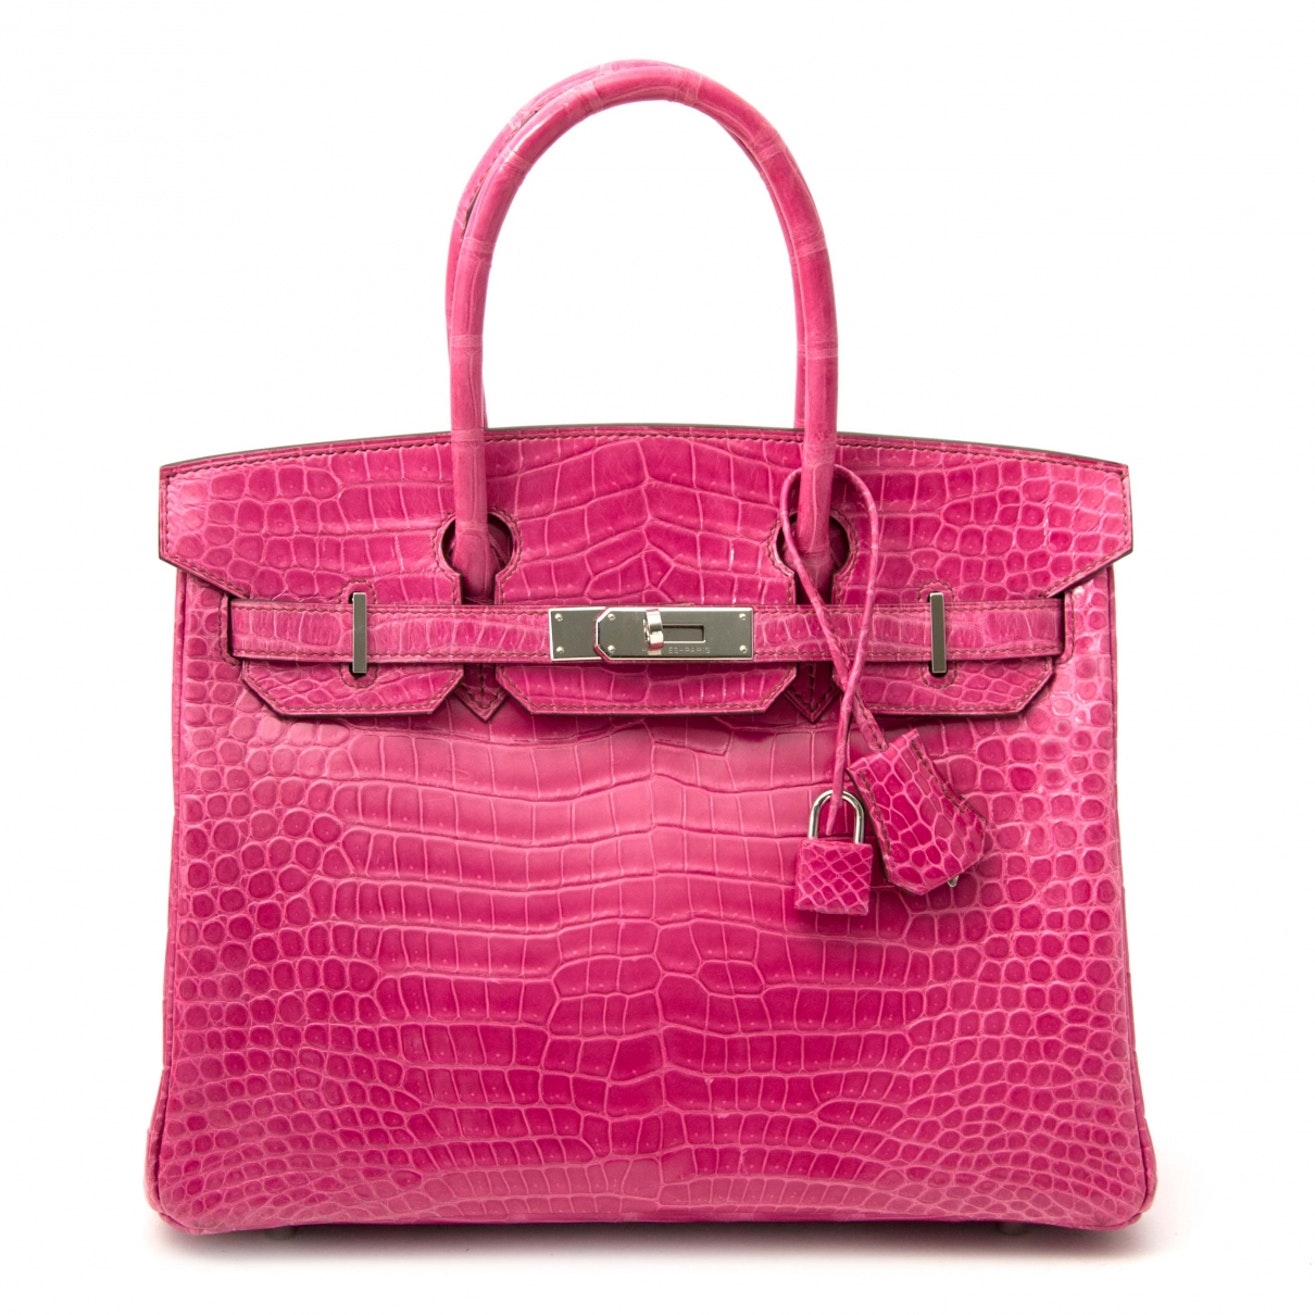 Does your Hermès Birkin or Kelly need a new look? These